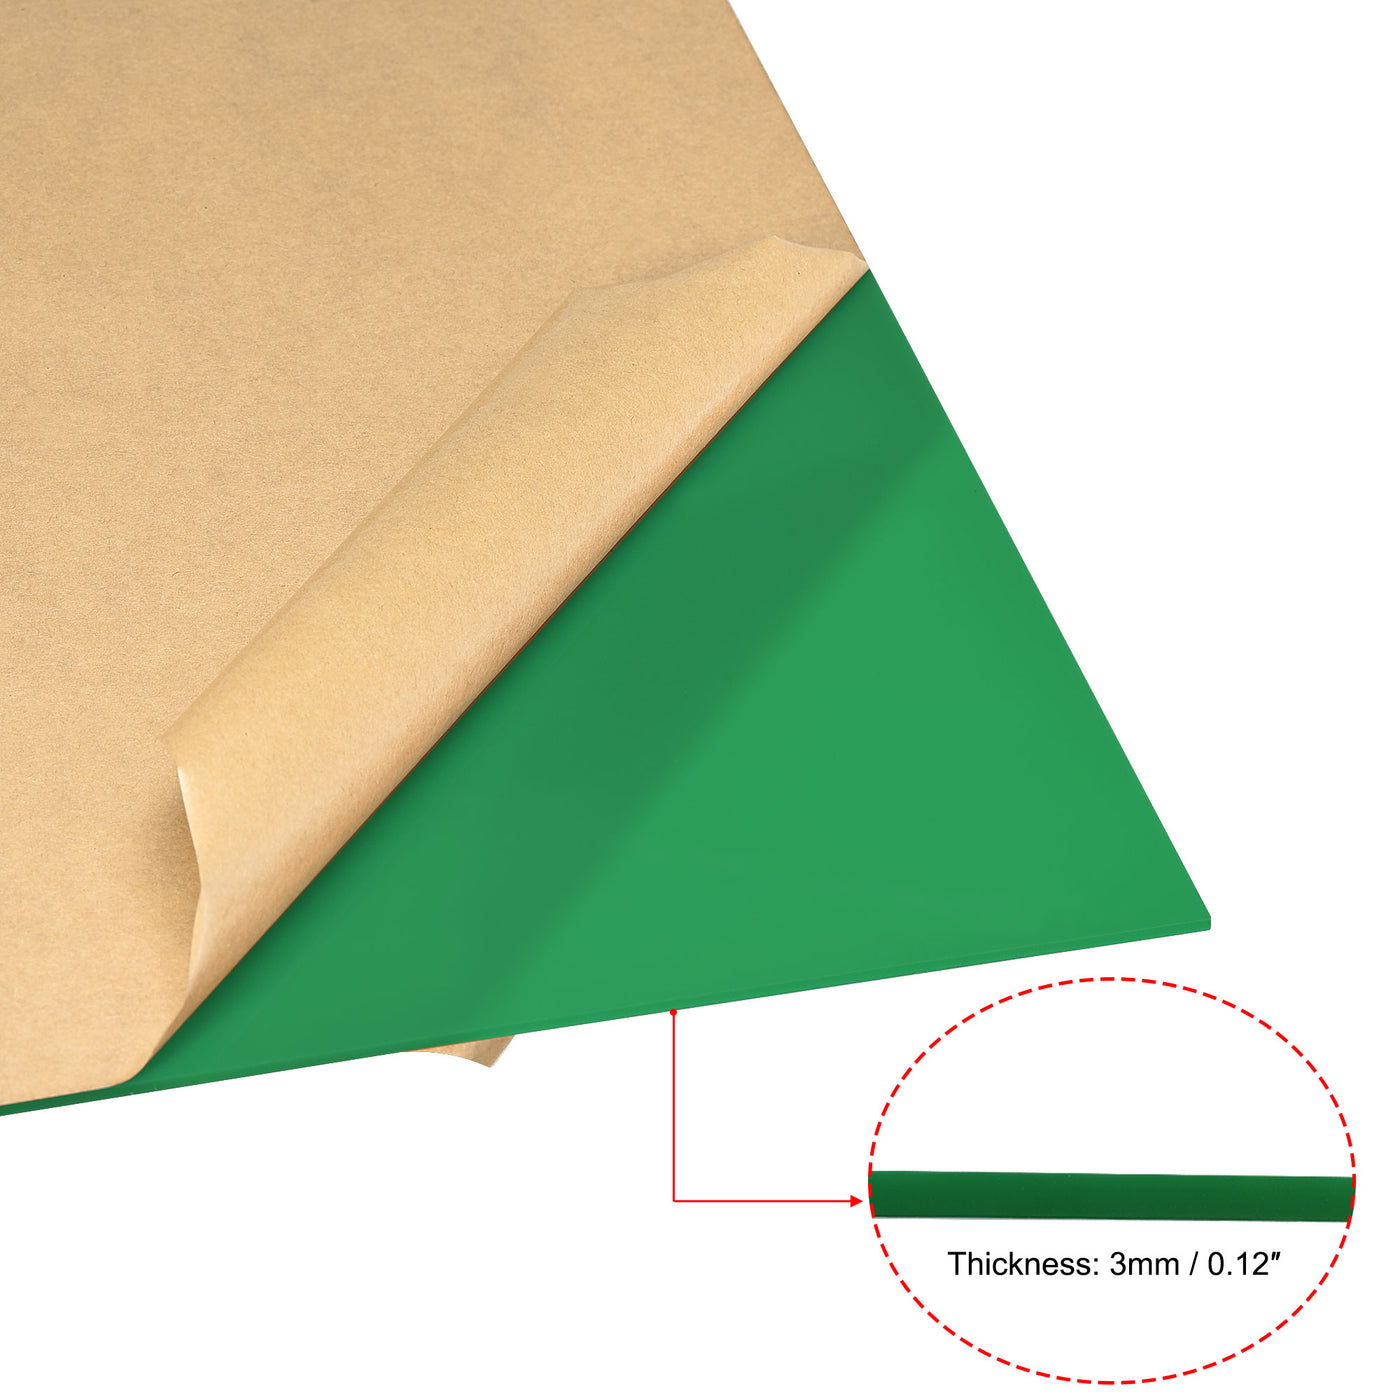 uxcell Uxcell 2pcs Green Cast Acrylic Sheet,12" x 12",3mm Thick,Plastic PMMA Acrylic Board